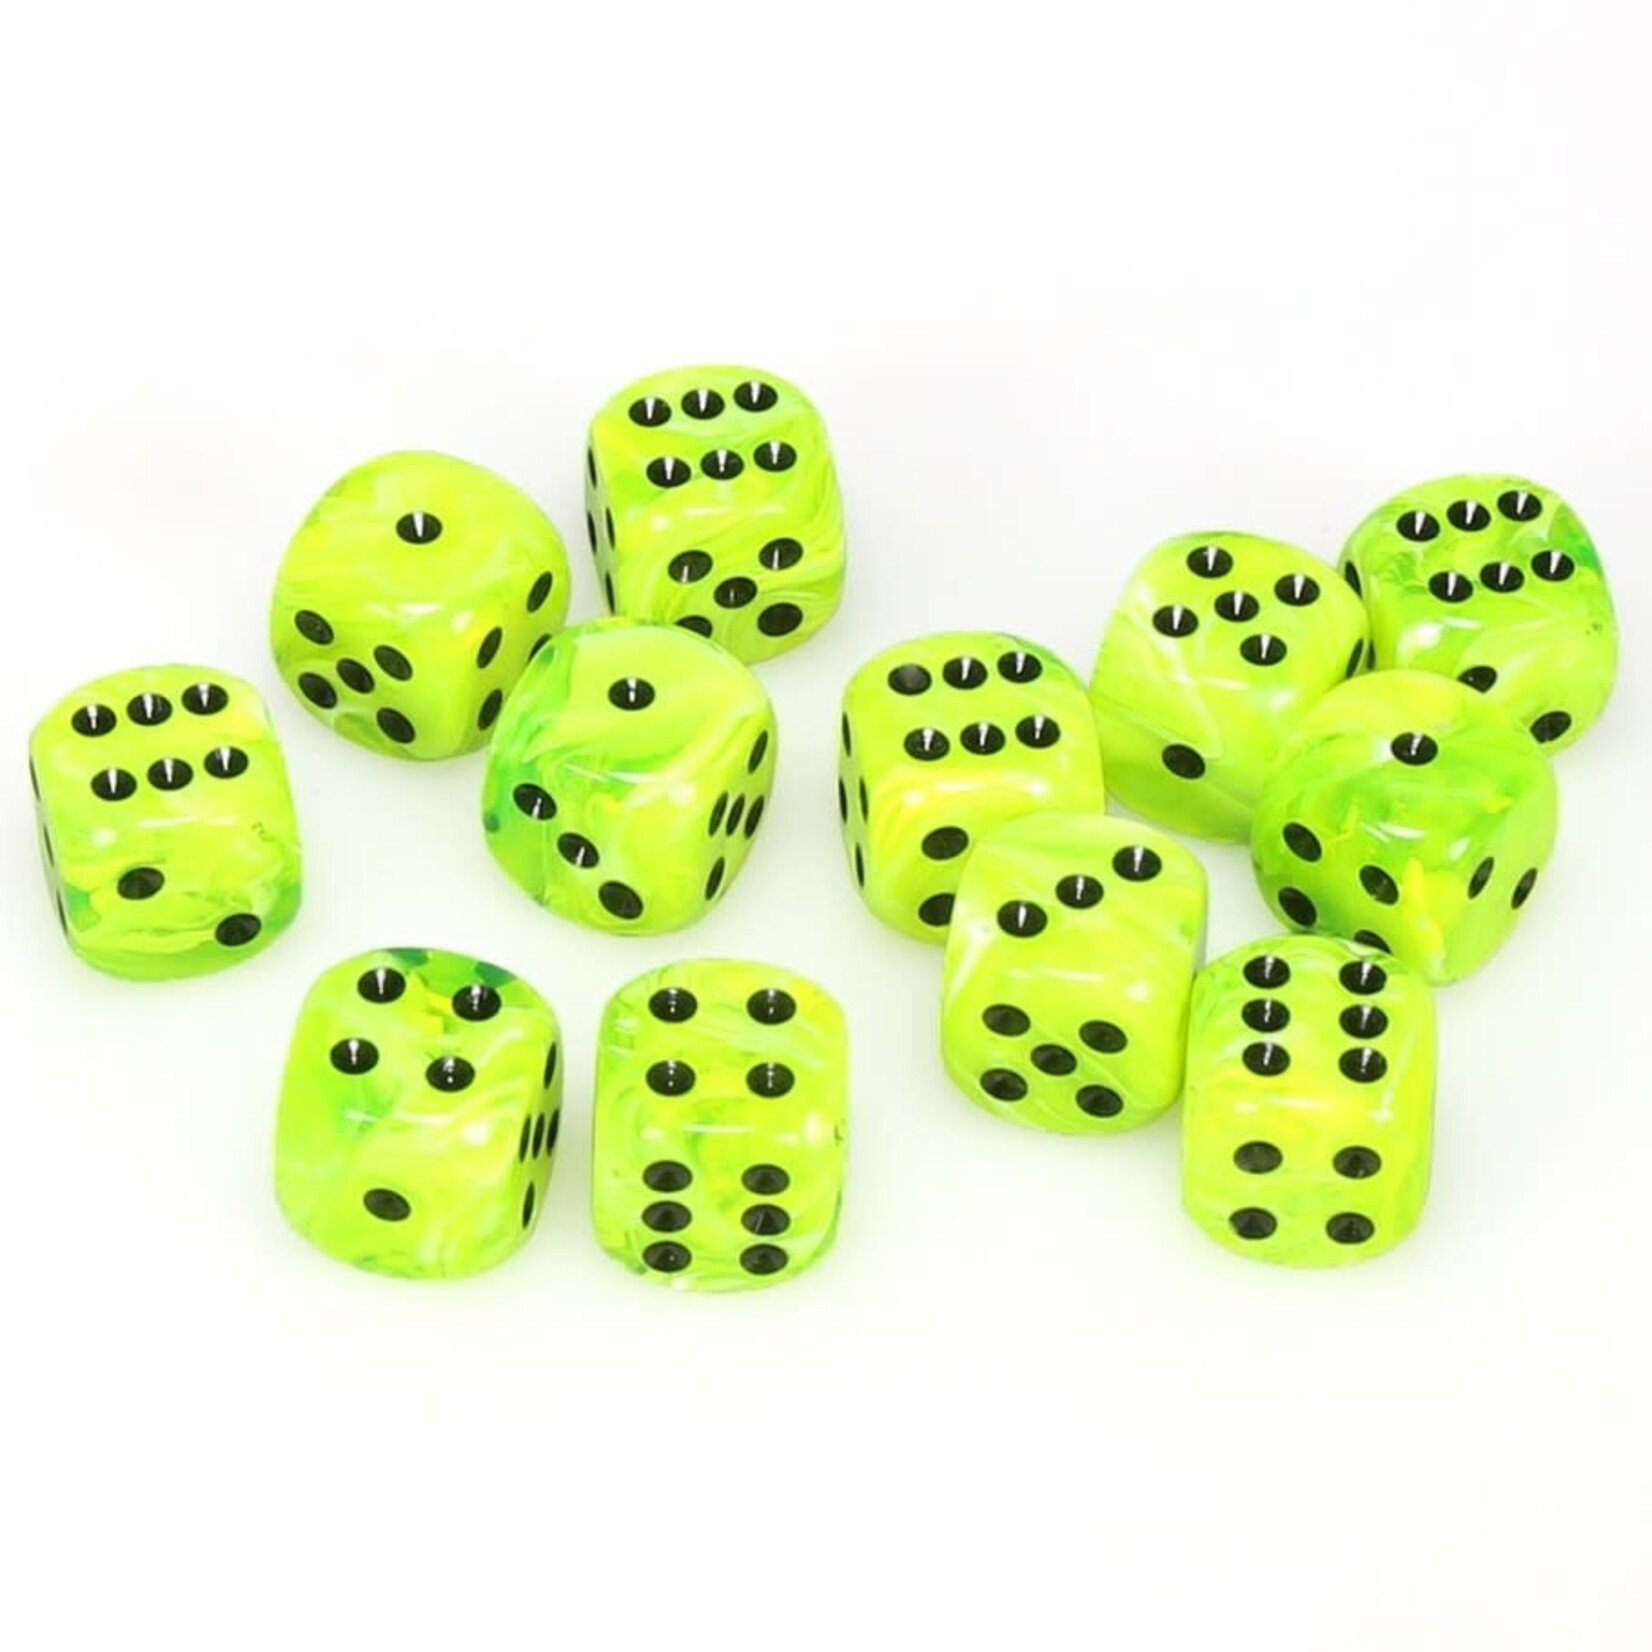 Chessex Cube of 12 D6 Dice Vortex Bright Green with black pips